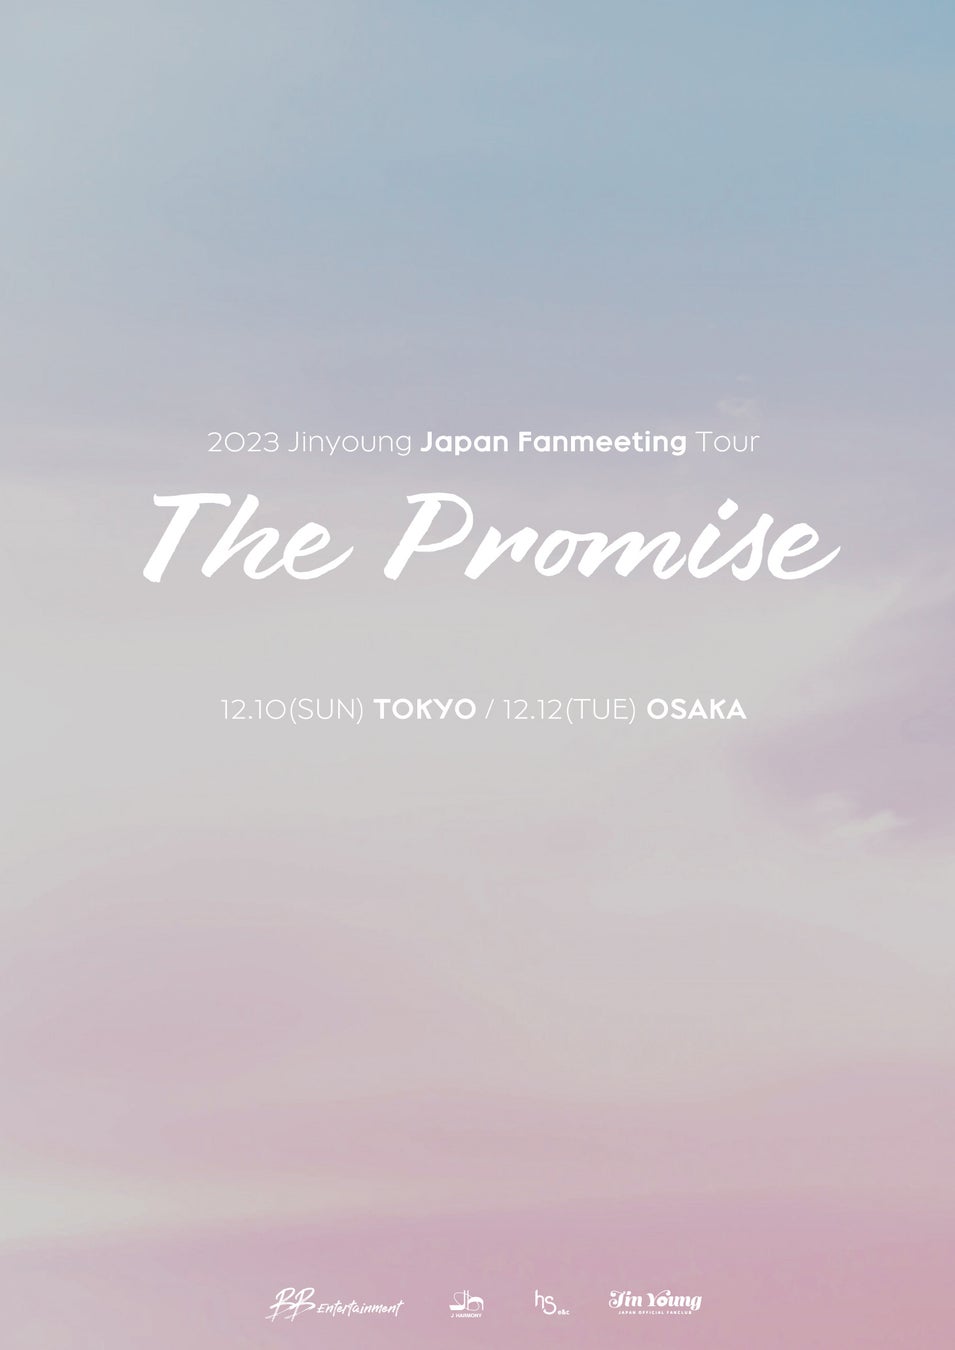 「2023 Jinyoung Japan Fanmeeting Tour 〈SWEET PROMISE〉」開催決定！のサブ画像1